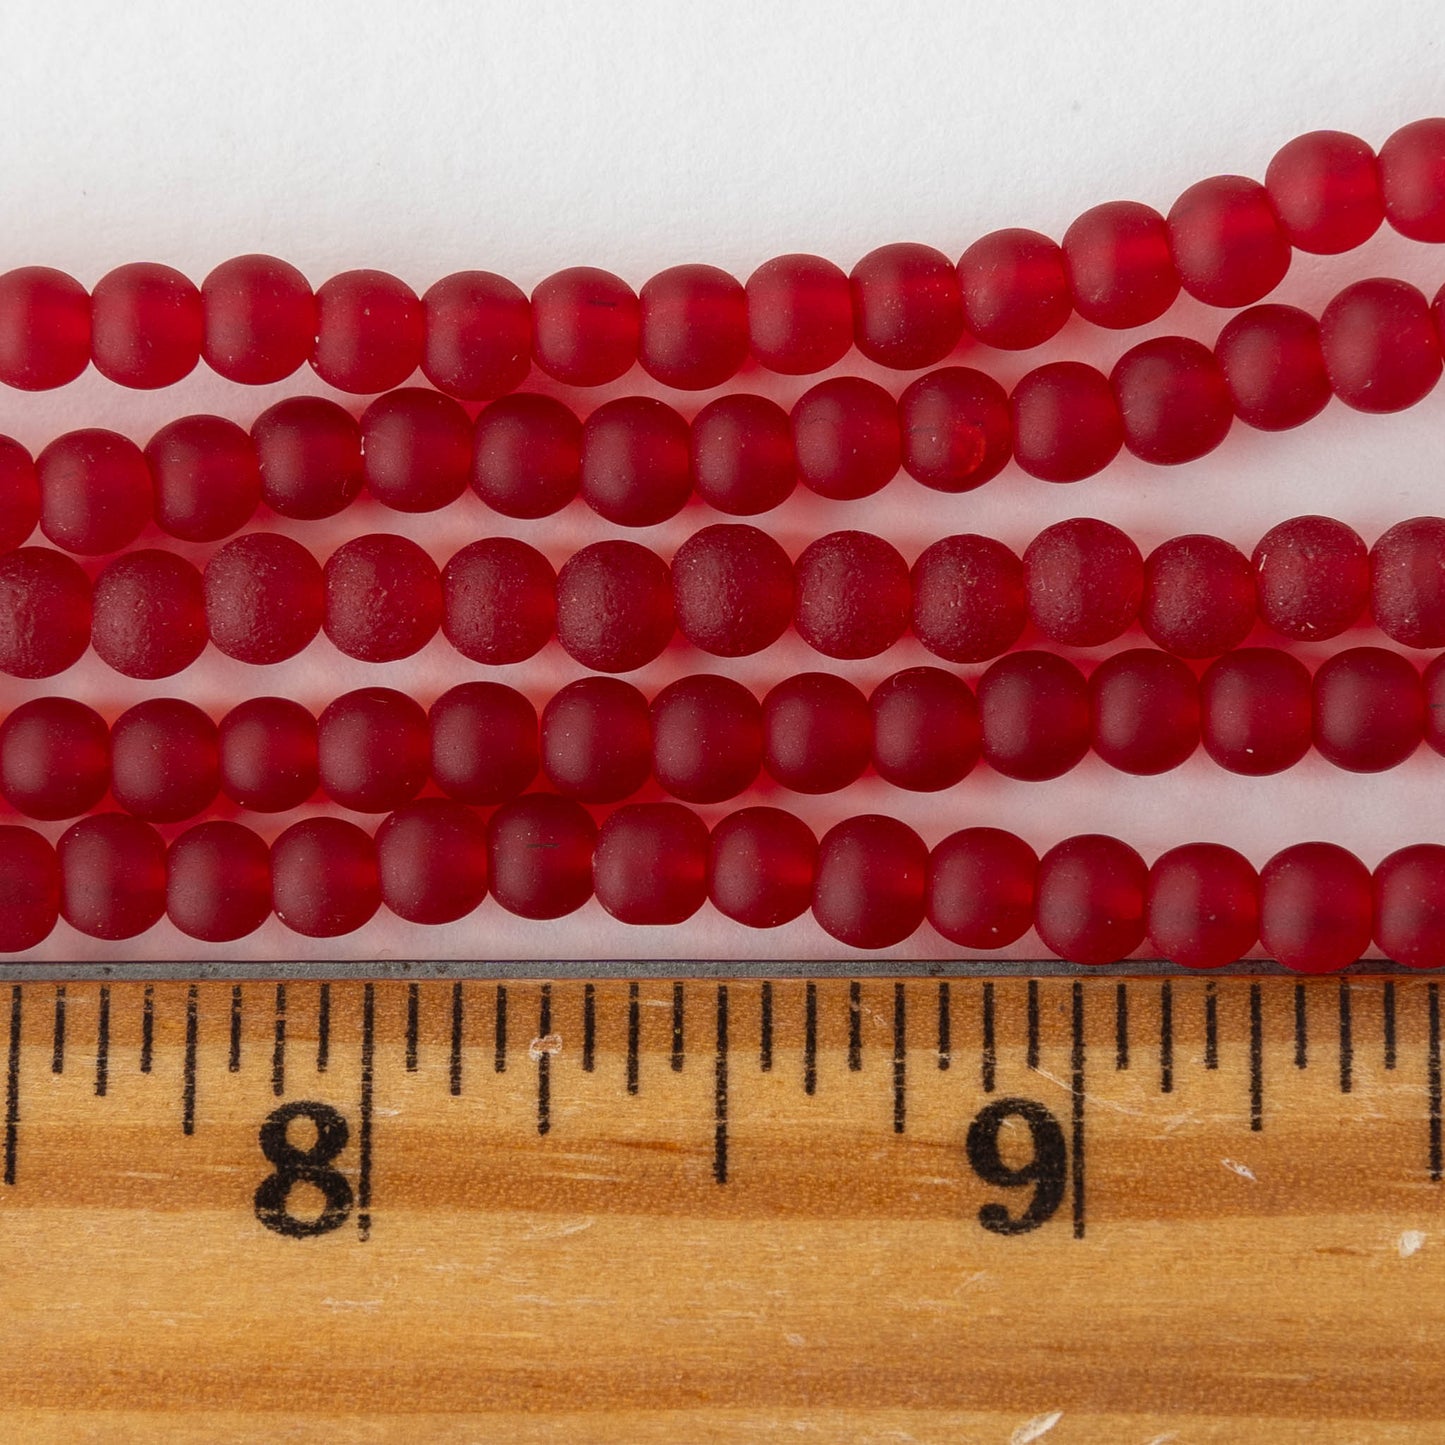 5mm Frosted Glass Round Beads - Red - 16 Inches